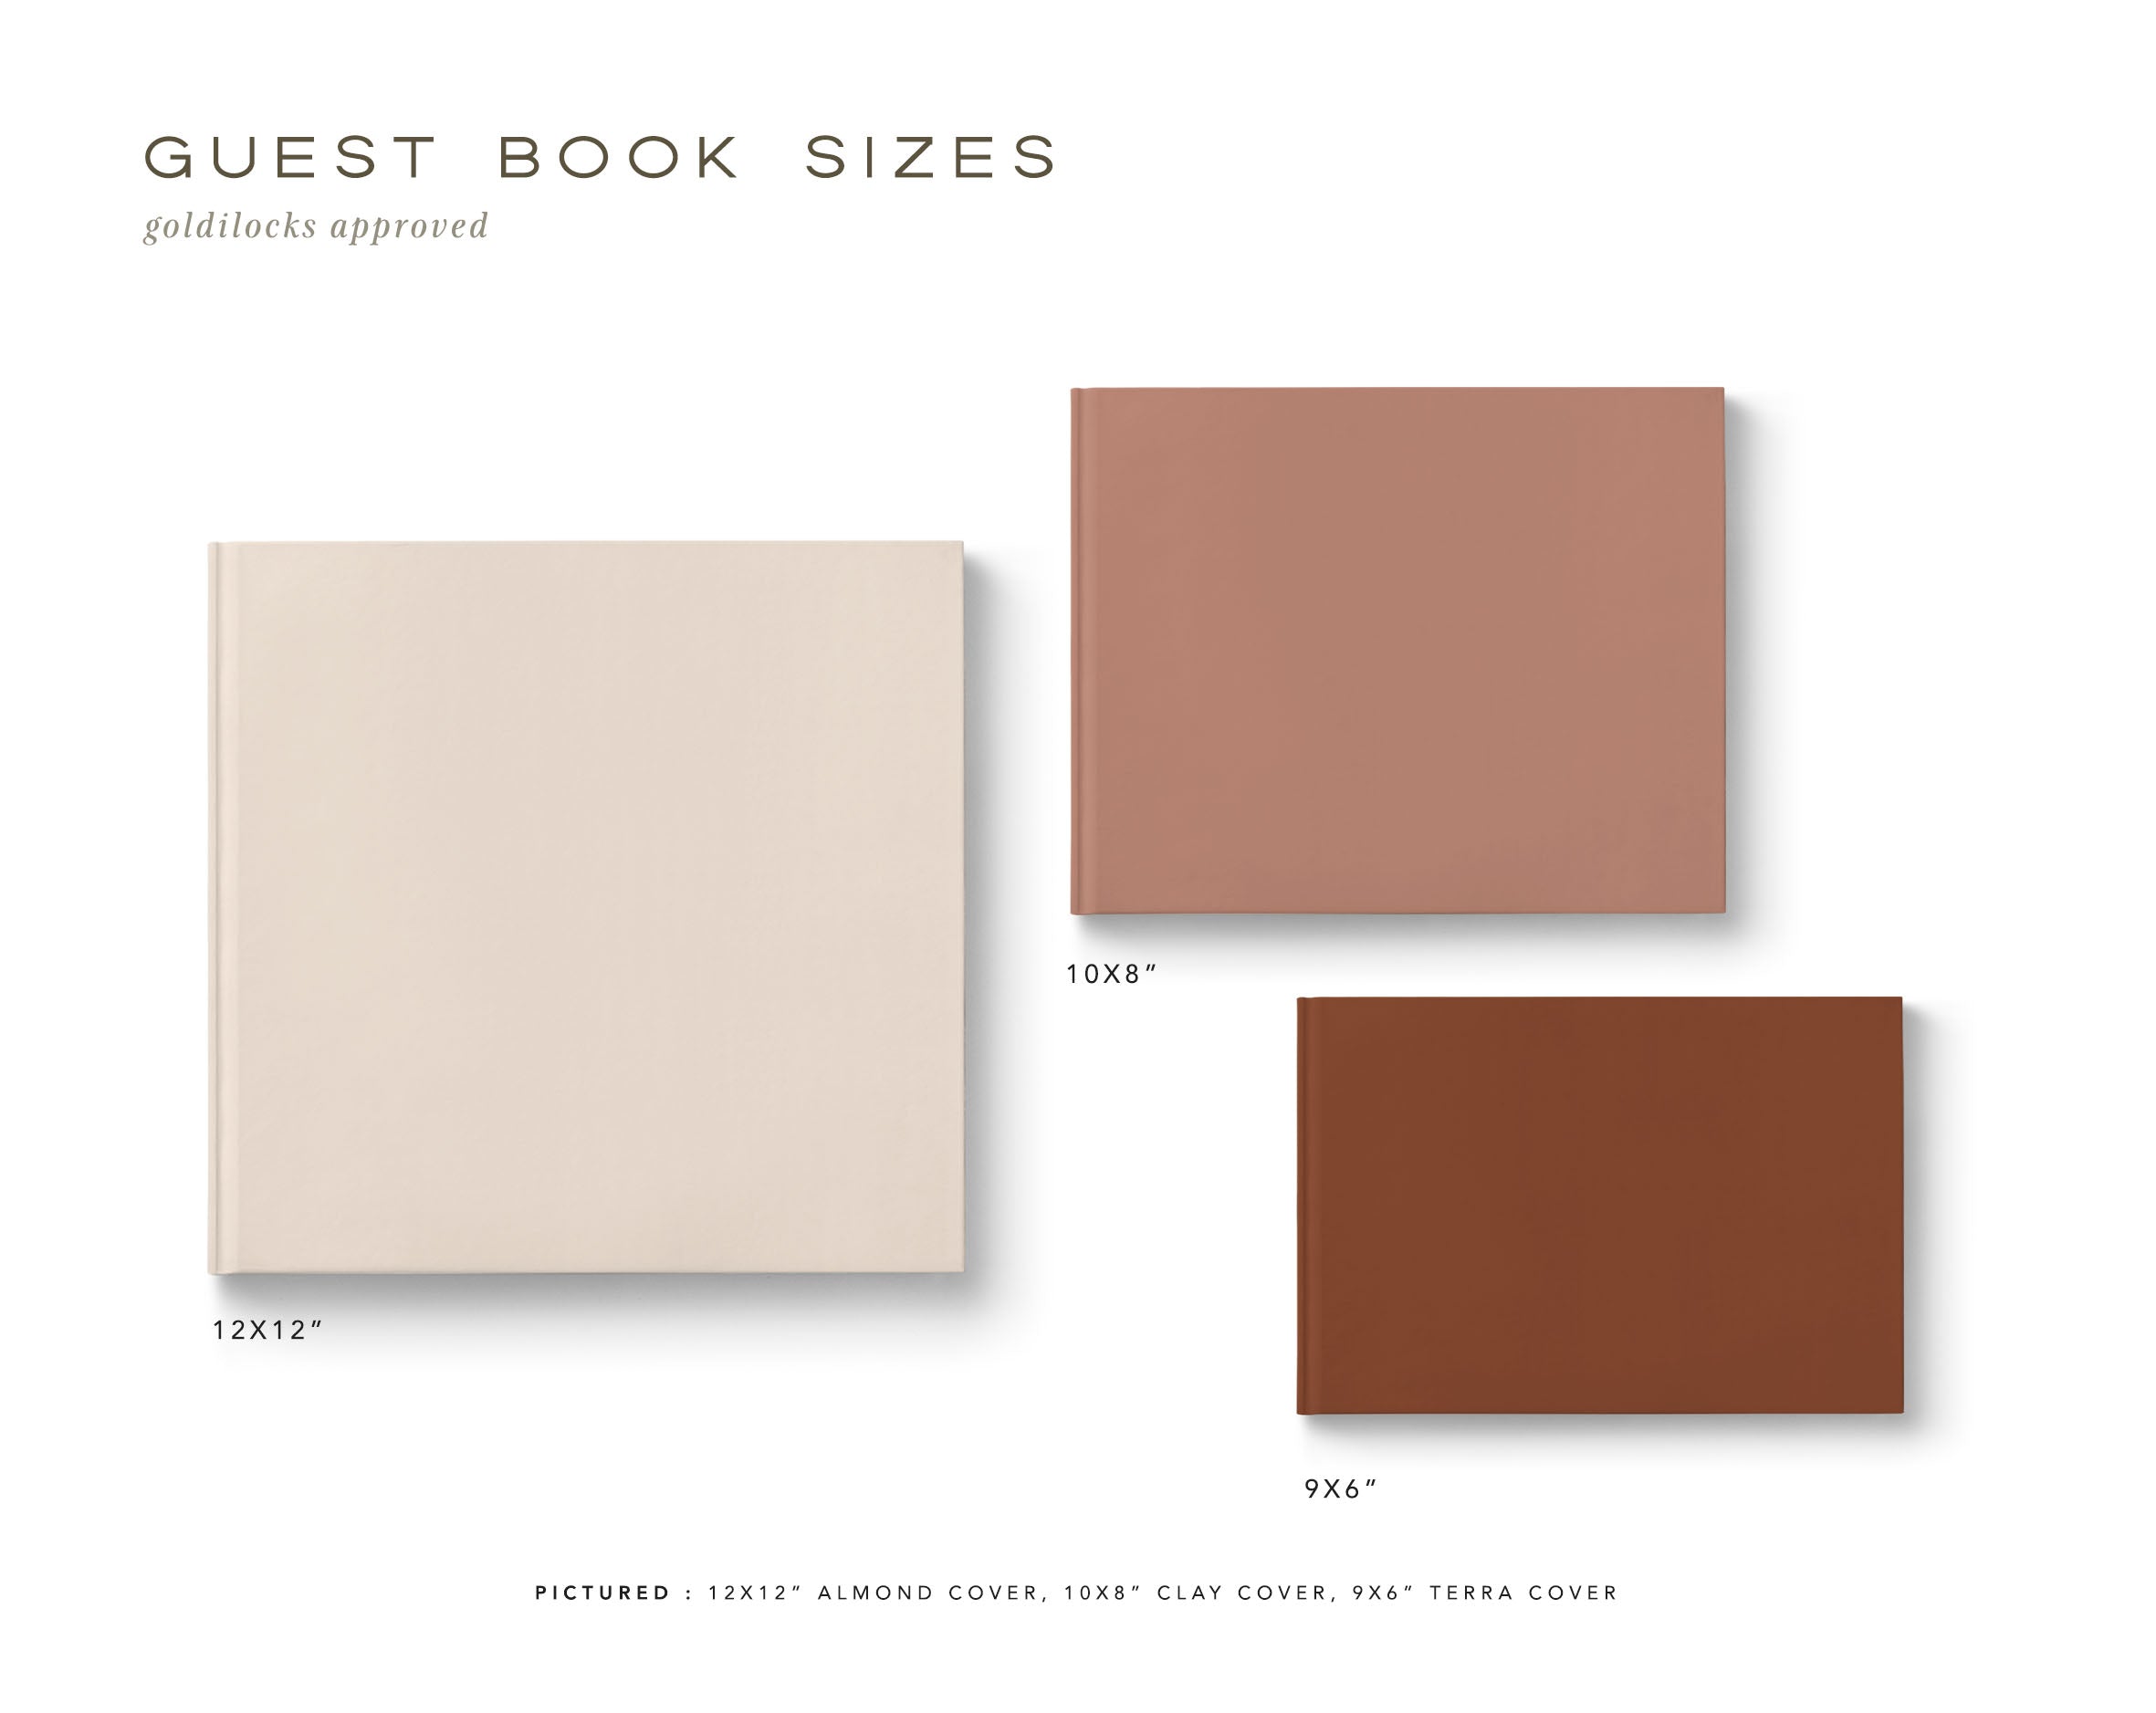 Guest Book 3 Size Options Available